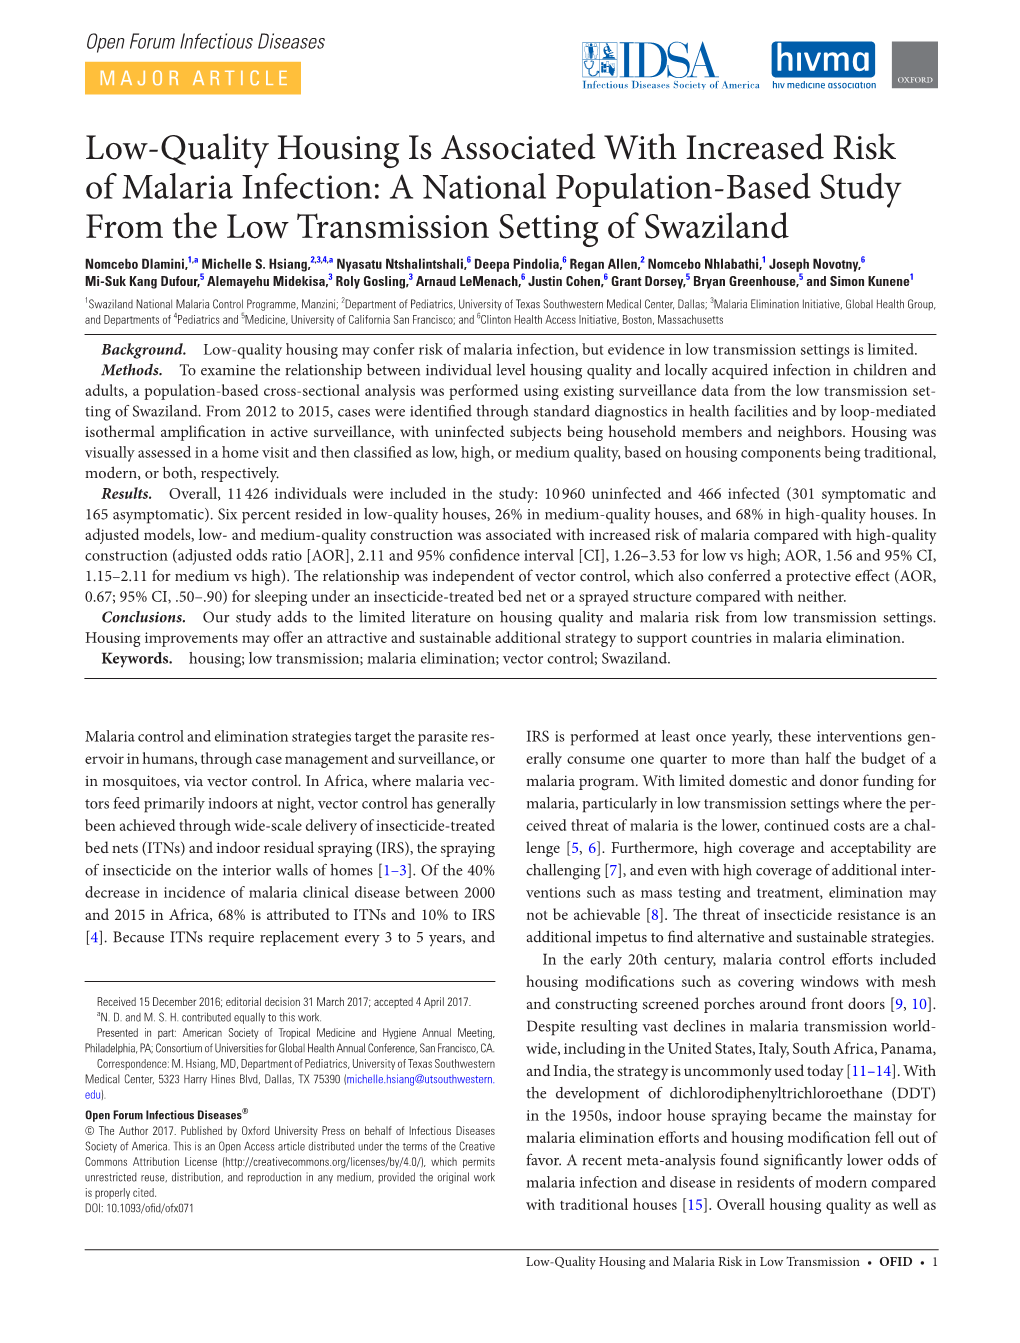 Low-Quality Housing Is Associated with Increased Risk of Malaria Infection: a National Population-Based Study from the Low Tran